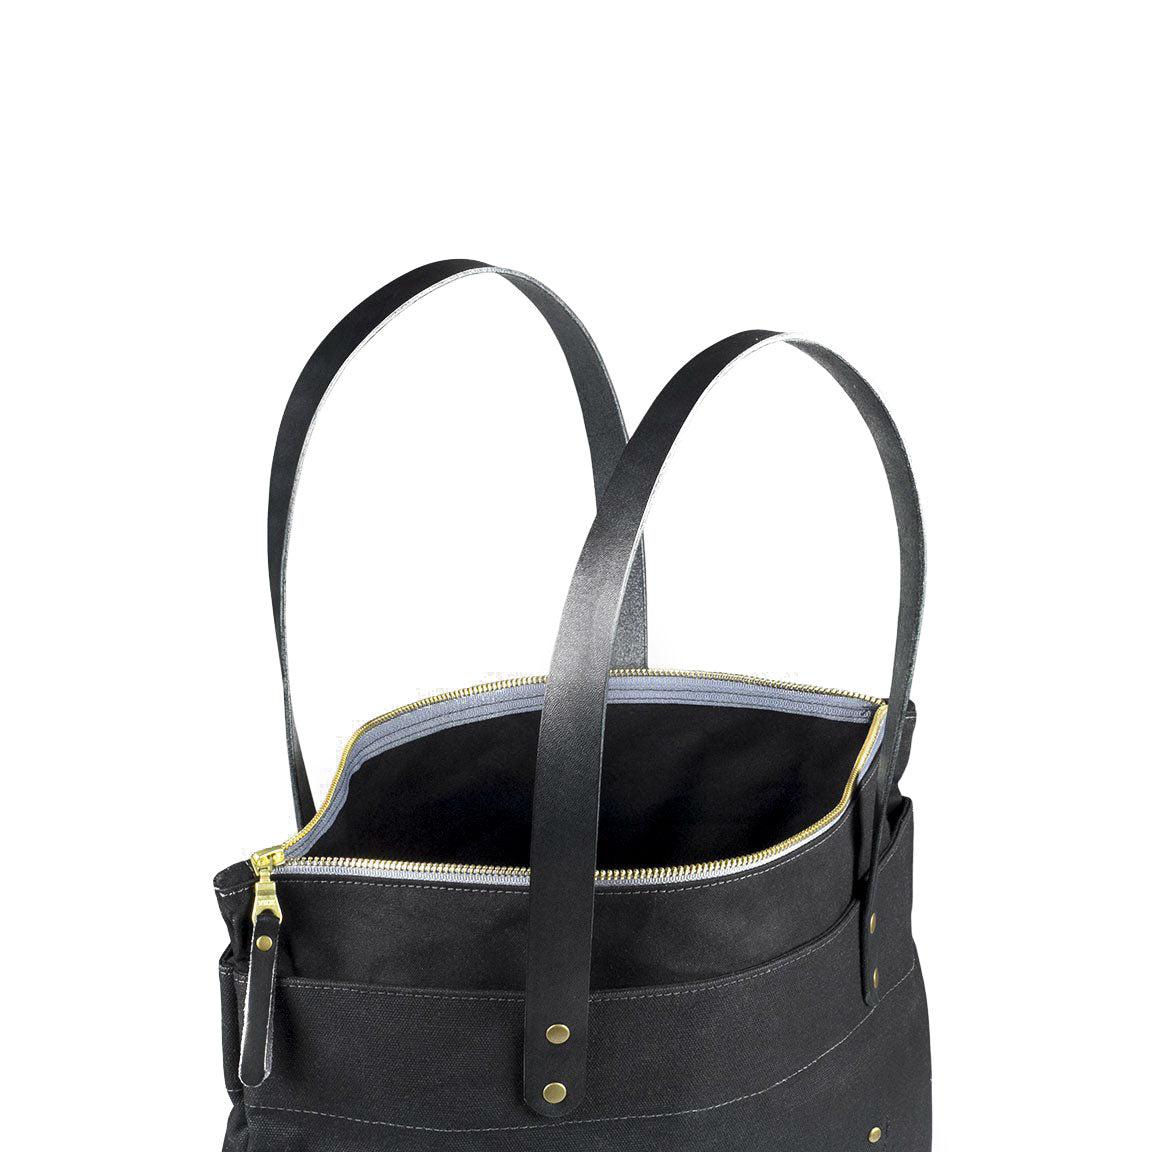 Zipper Tote Black Waxed Canvas & Black Leather